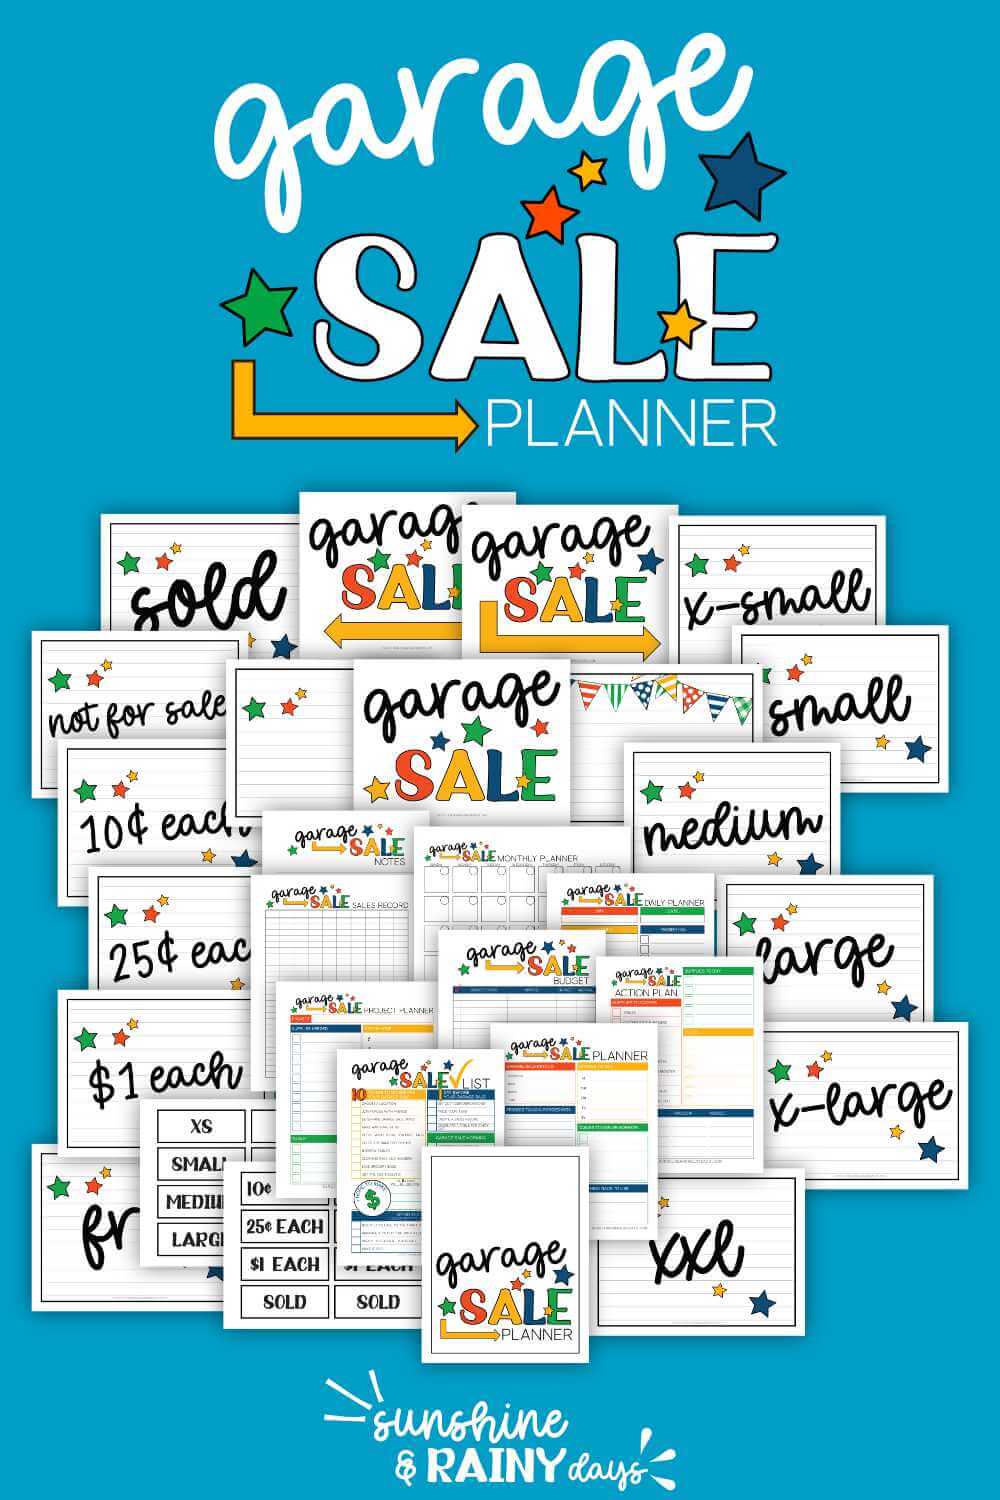 Garage Sale Planner pages you can print at home!